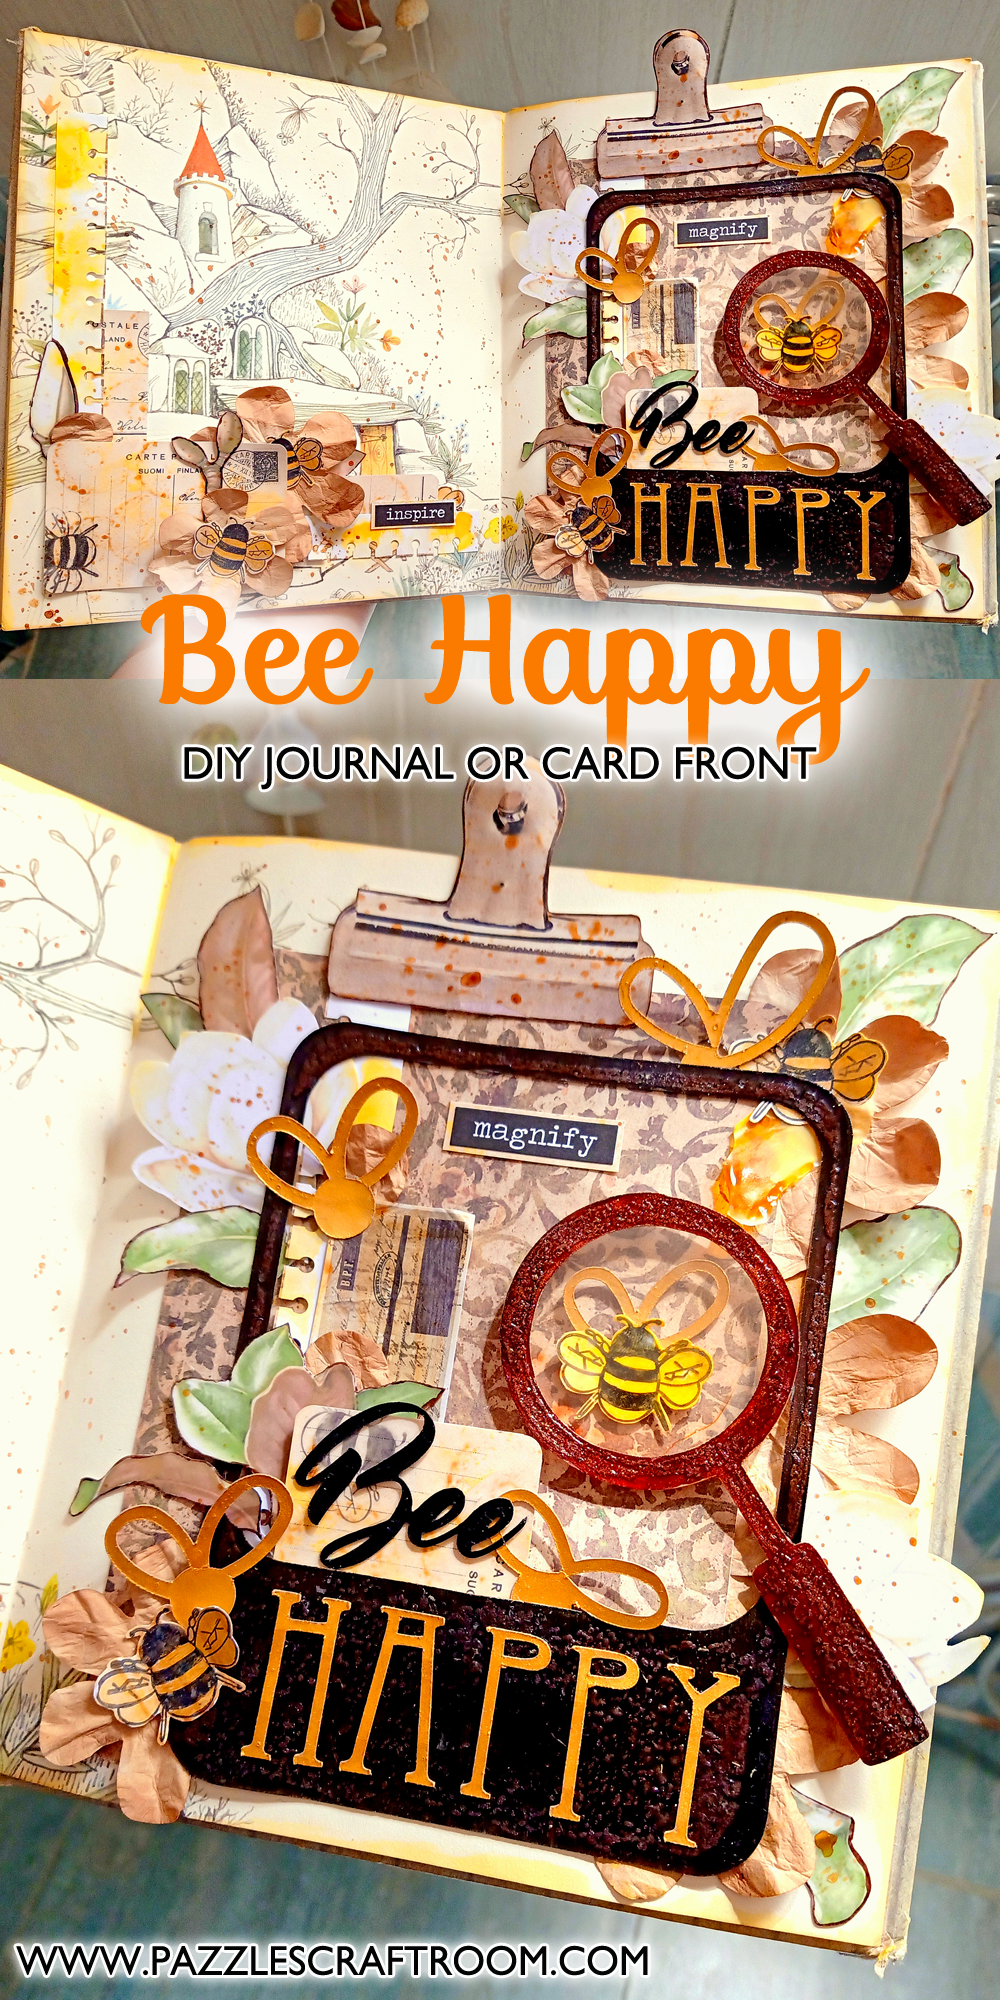 Pazzles DIY Bee Happy Journal or Card Cover. Instant SVG download compatible with all major electronic cutters including Pazzles Inspiration, Cricut, and Silhouette Cameo. Design by Zahraa Darweesh.